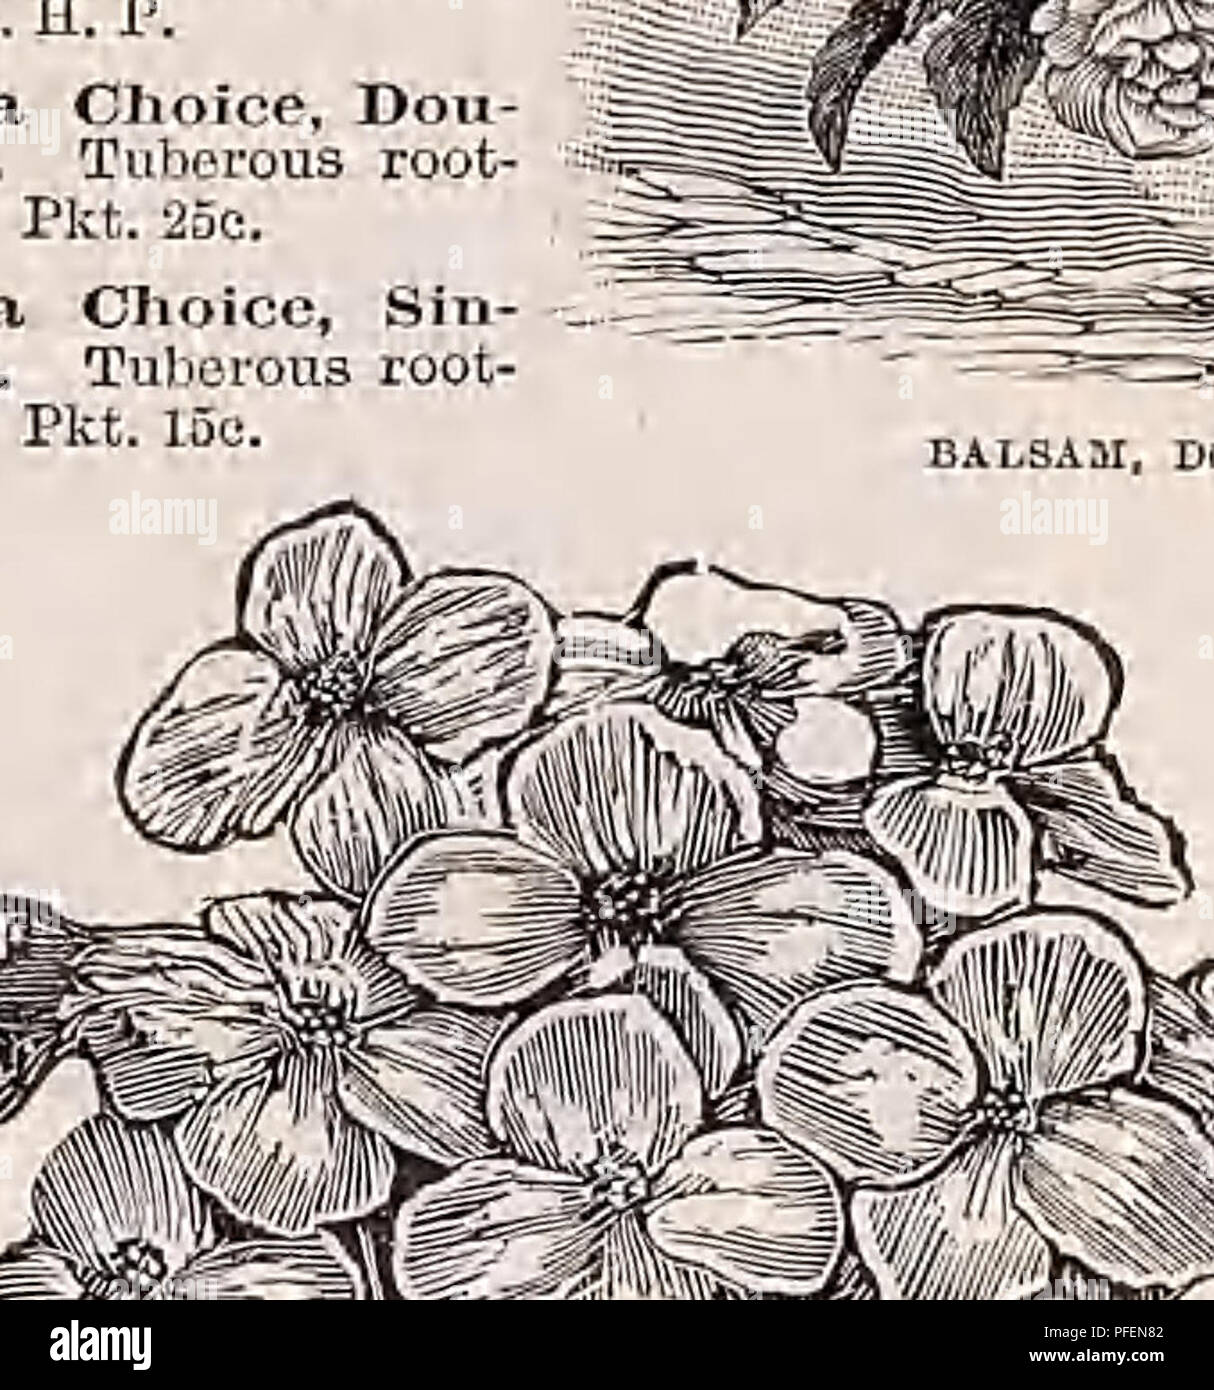 . Descriptive catalogue of vegetable, flower, and farm seeds. Nurseries (Horticulture); Nursery stock; Seeds; Bulbs (Plants); Gardening; Equipment and supplies; Bedding plants; Weeber &amp; Don. CALENDULA METEOR OACAtTA (Tassel Mower). A very beautiful and profuse flowering plant, â with tassel-shaped flowers. H. A. Coccinea. Orange-scarlet, flowering in clusters; pretty, 1% ft. Pkt. 5c. CALAXimiXIA. Beautiful, free-flow- ering plants, adapted for roek-work and dry, hot situations. H. A. Splendid Mixed. 1 ft. Pkt. 5c. CALCEOLARIA Plants of a highlv decorative character, forming in spring dense Stock Photo